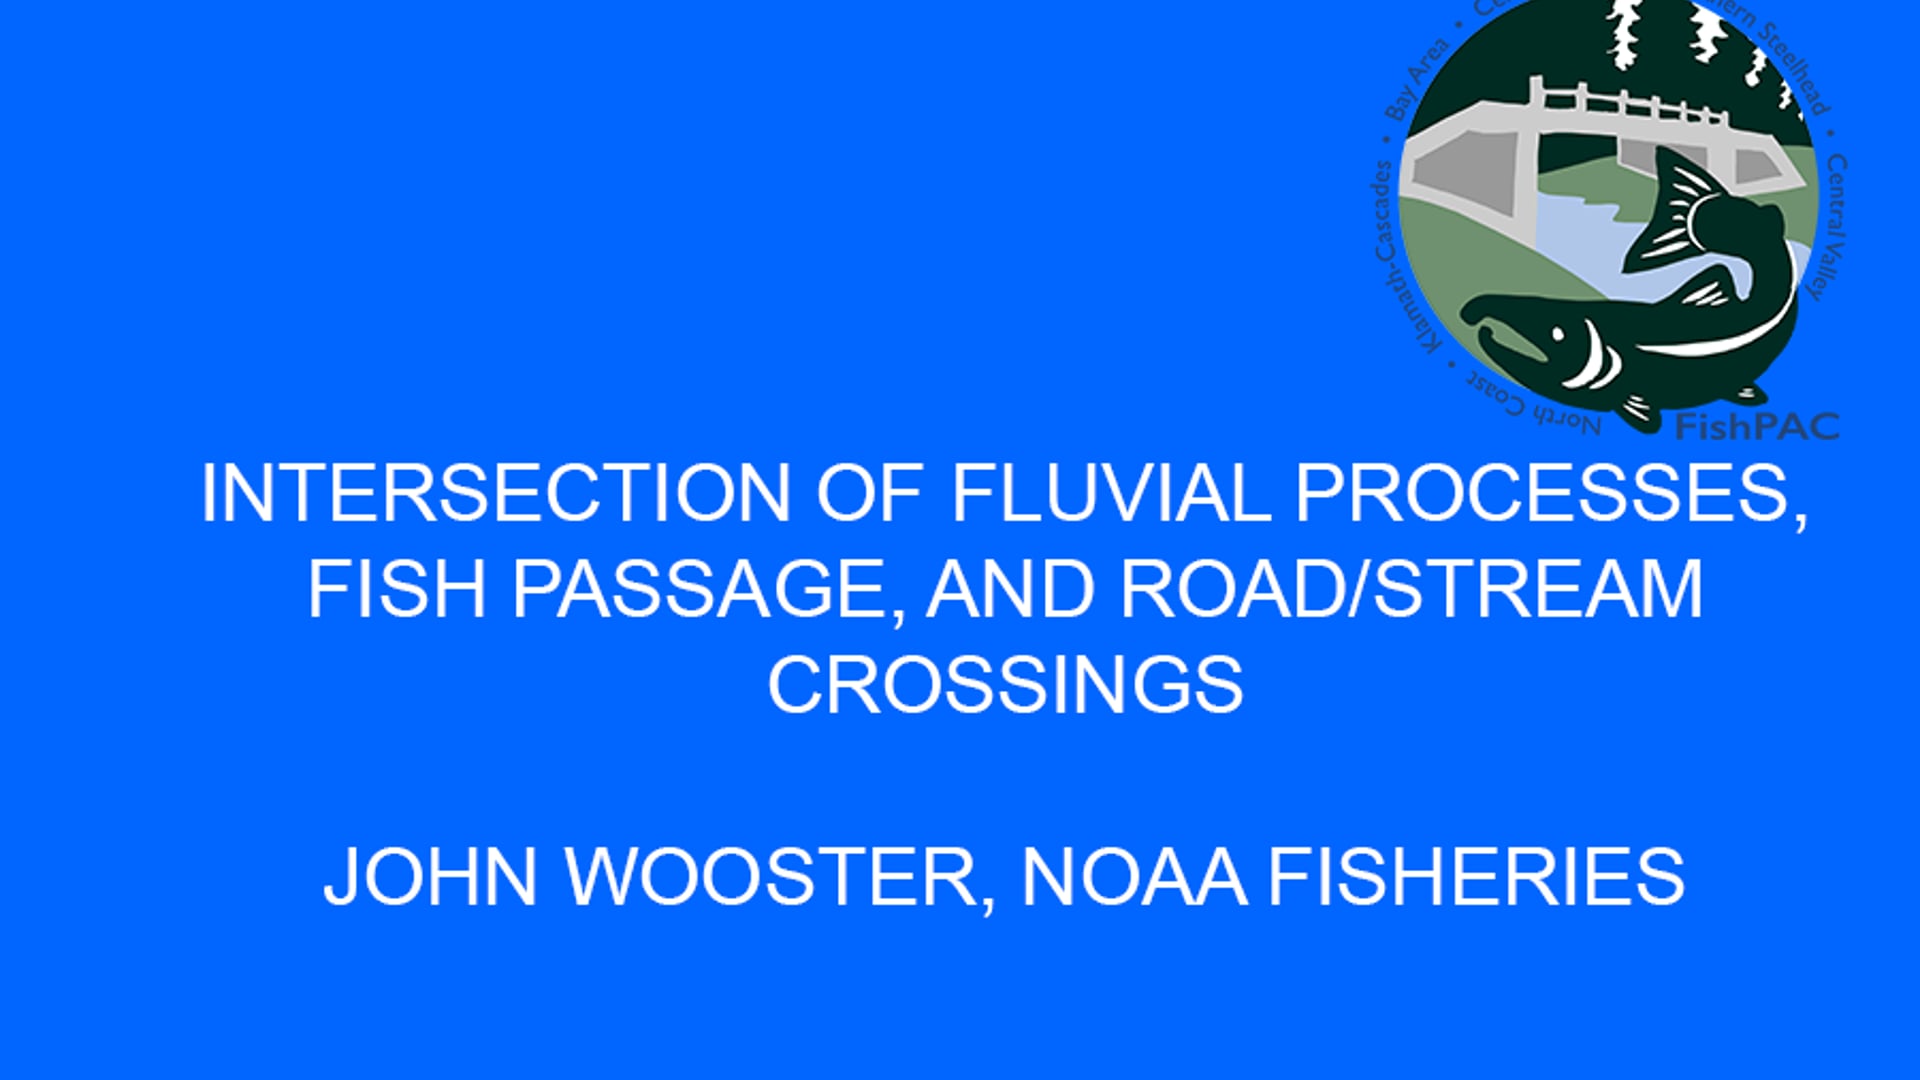 Intersection of fluvial processes, fish passage, and road/stream crossings